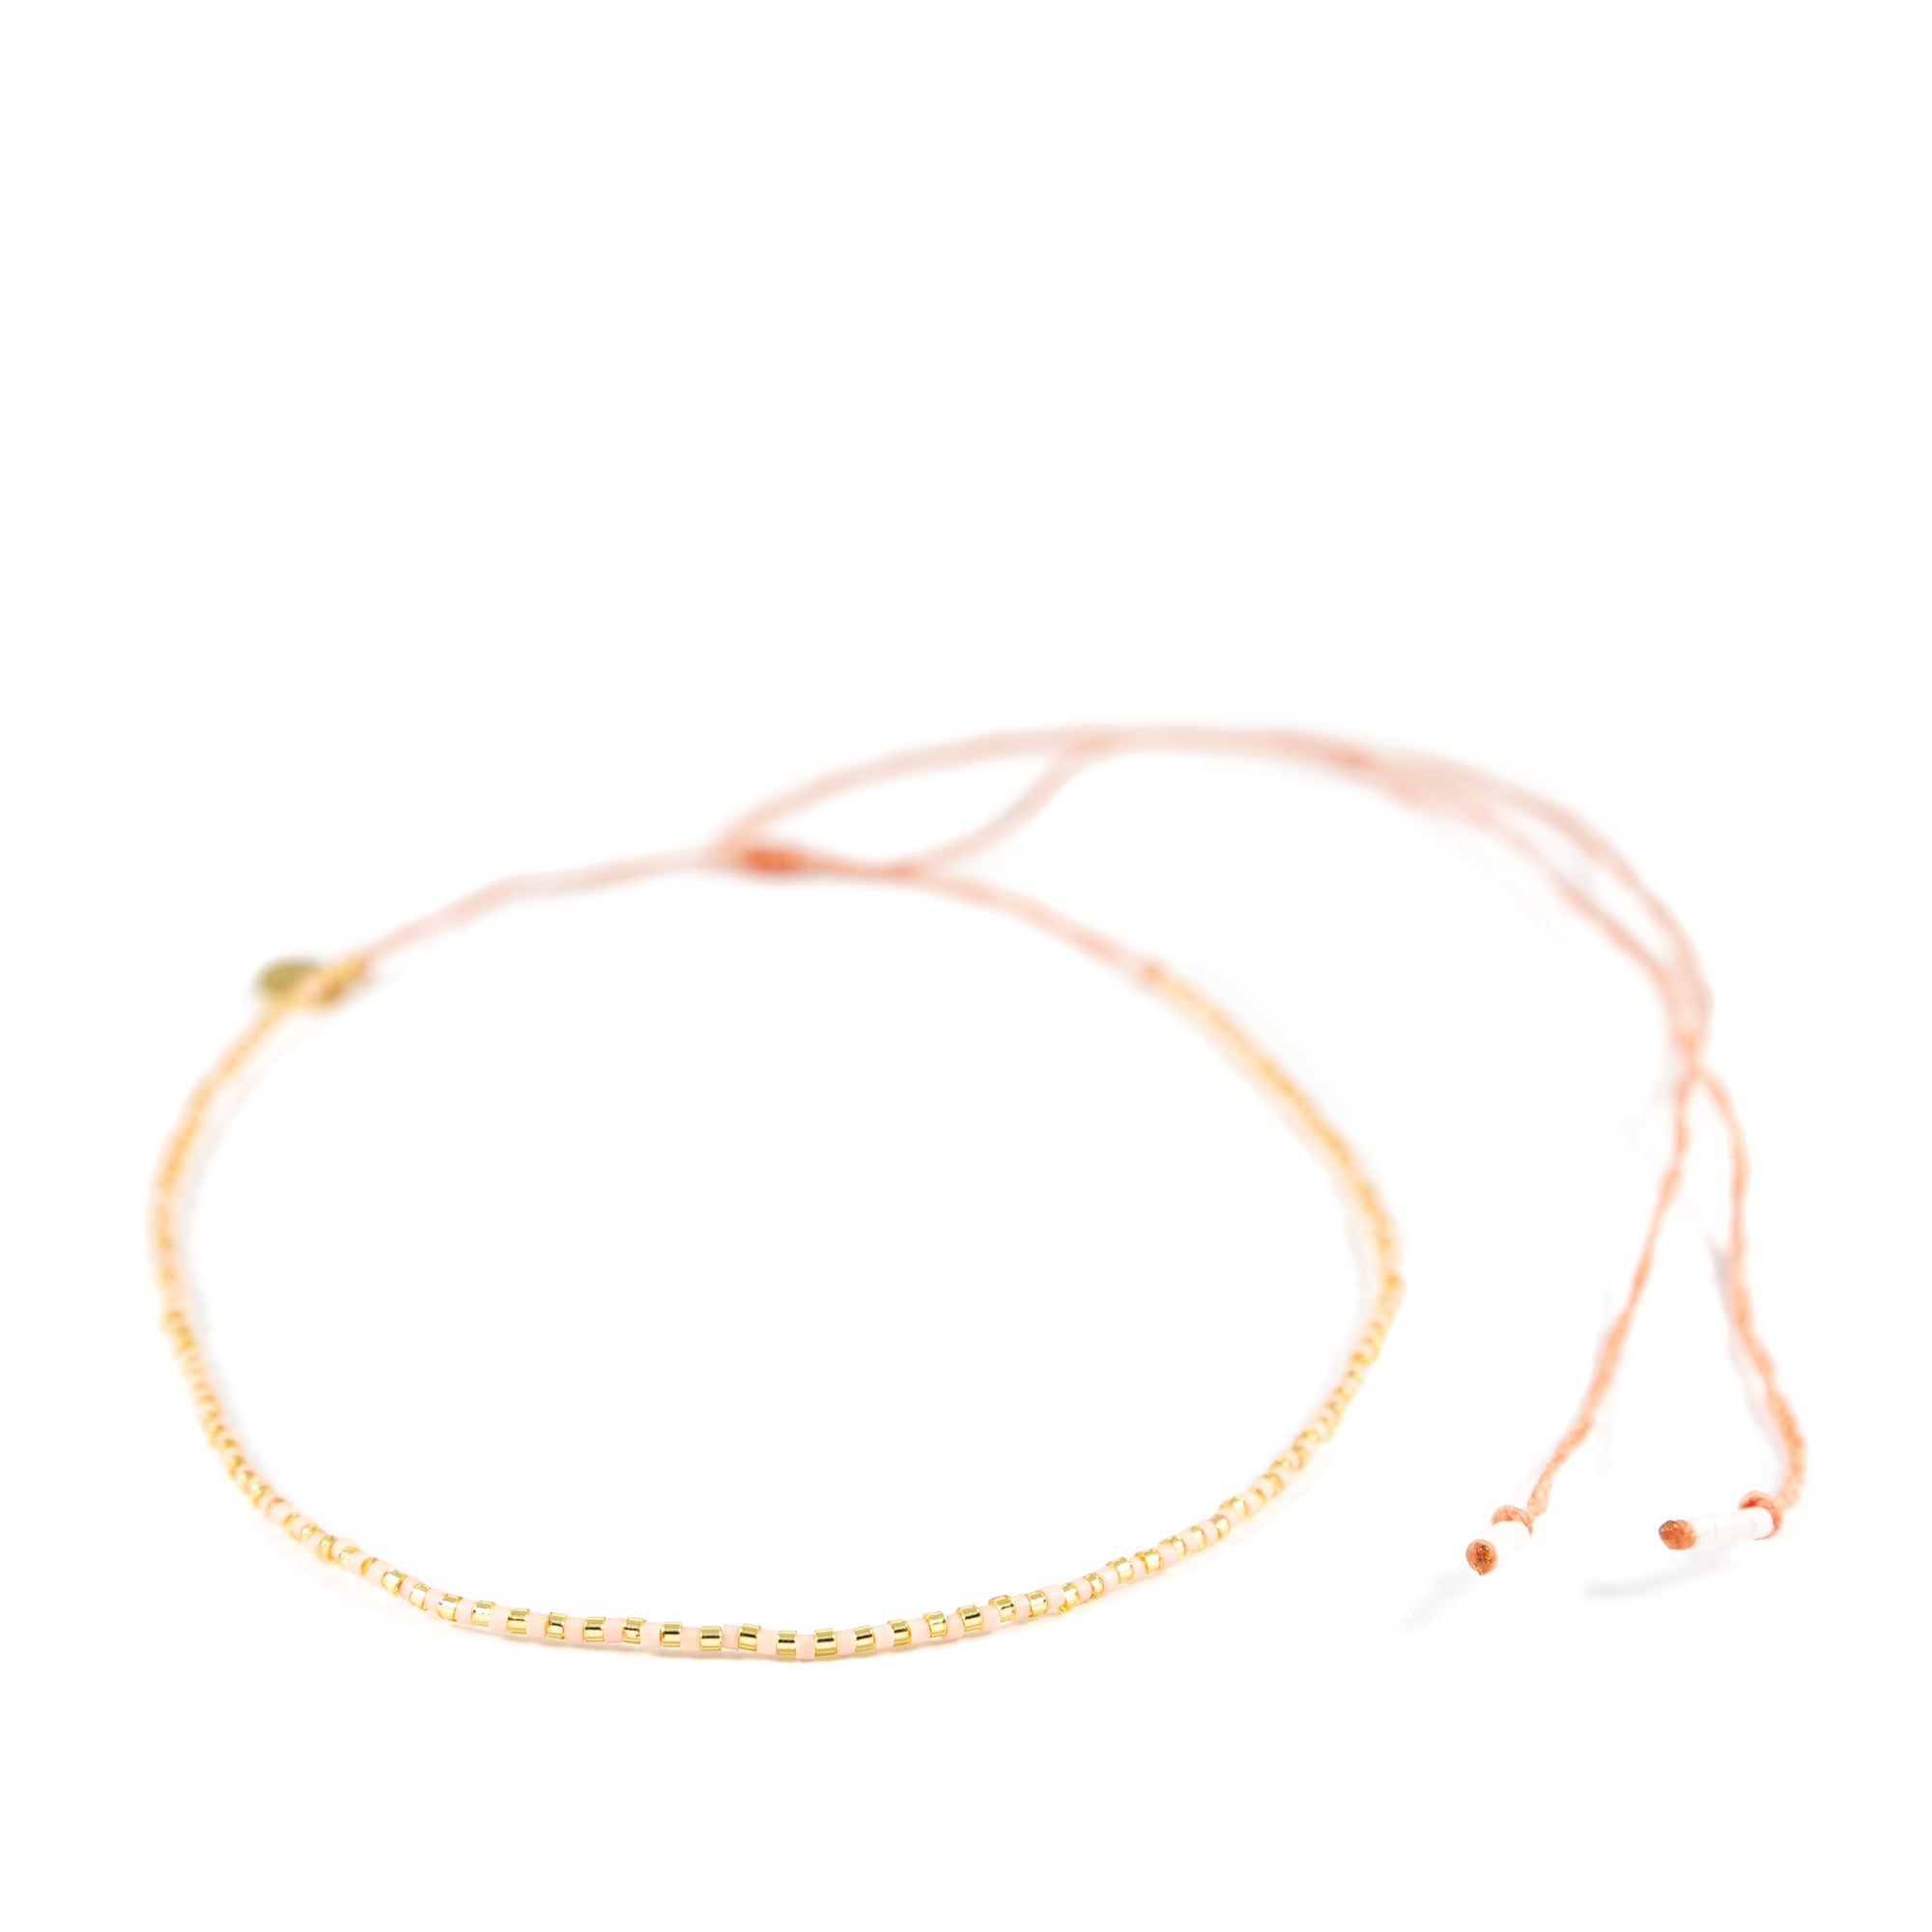 Coral & Gold Sparkle Alternating Mermaid Necklace